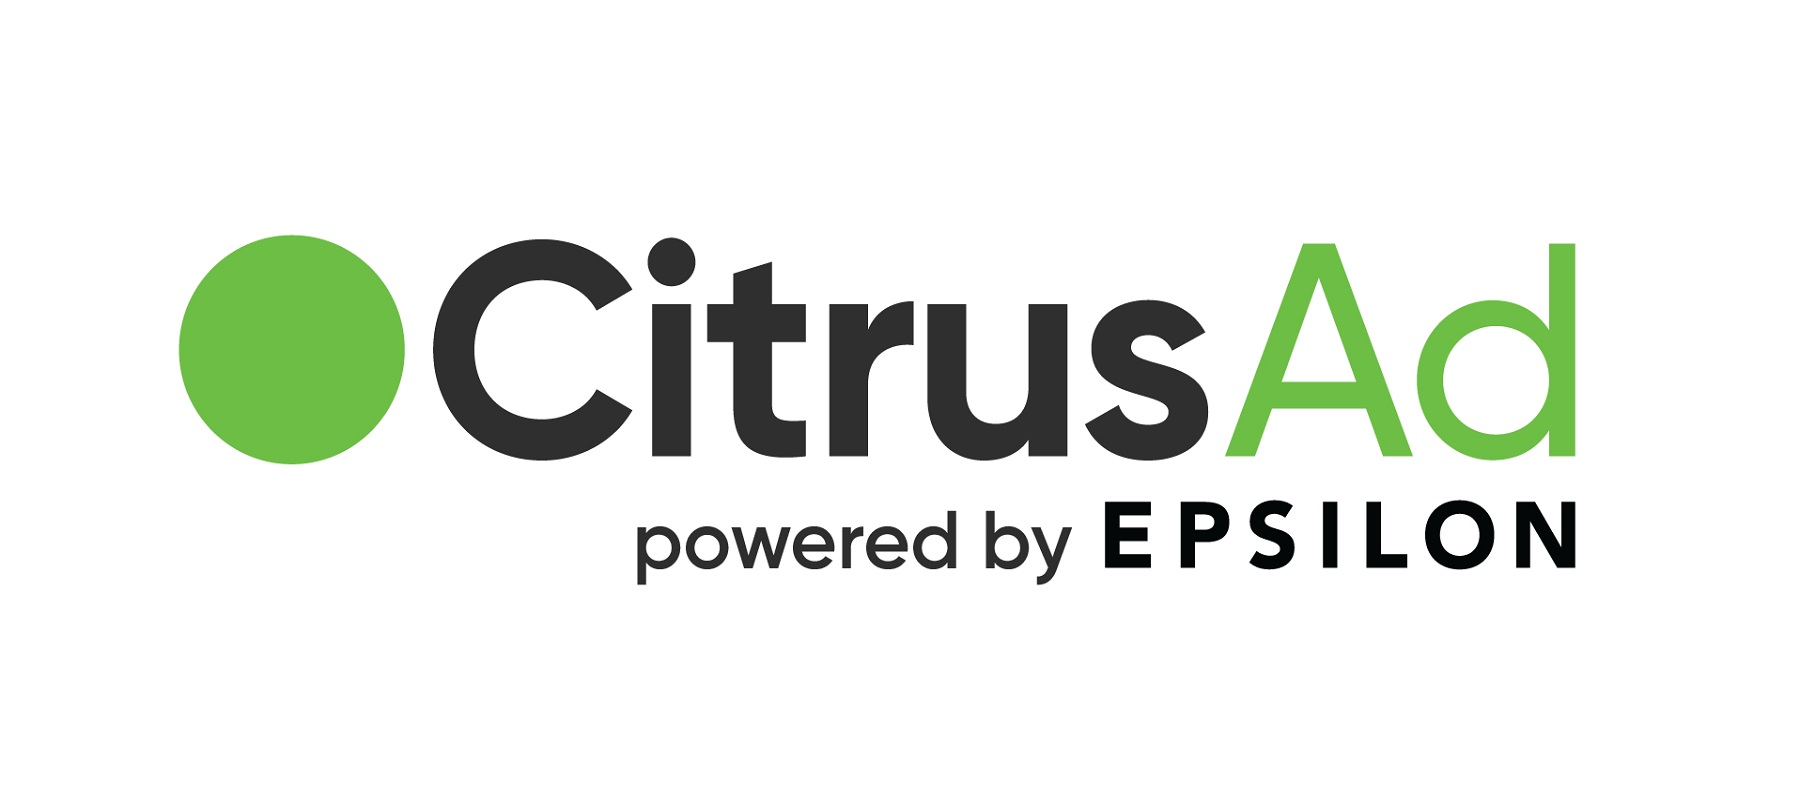 Flywheel and CitrusAd support retail media with global API integration